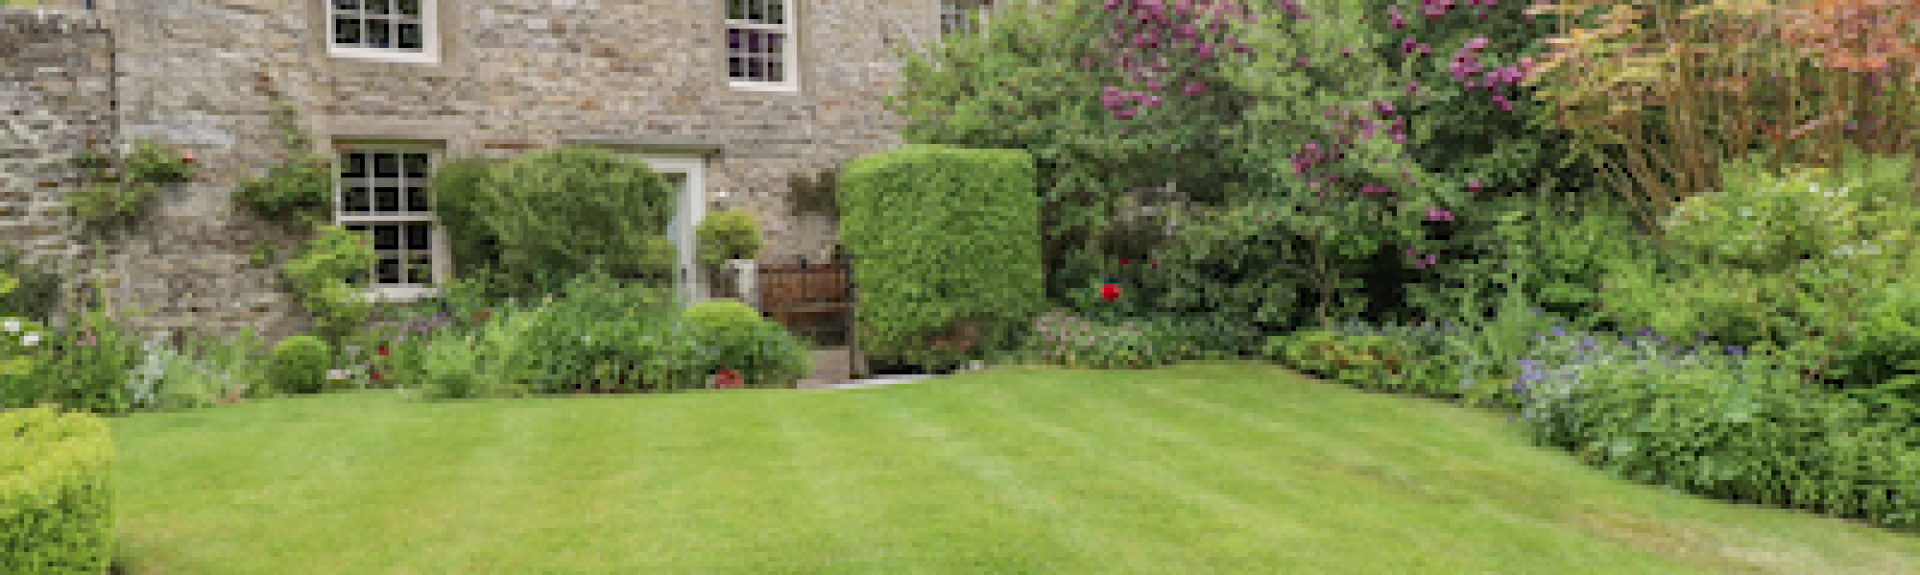 A large stone-built farmhouse overlooks a secure lawn and flower beds.